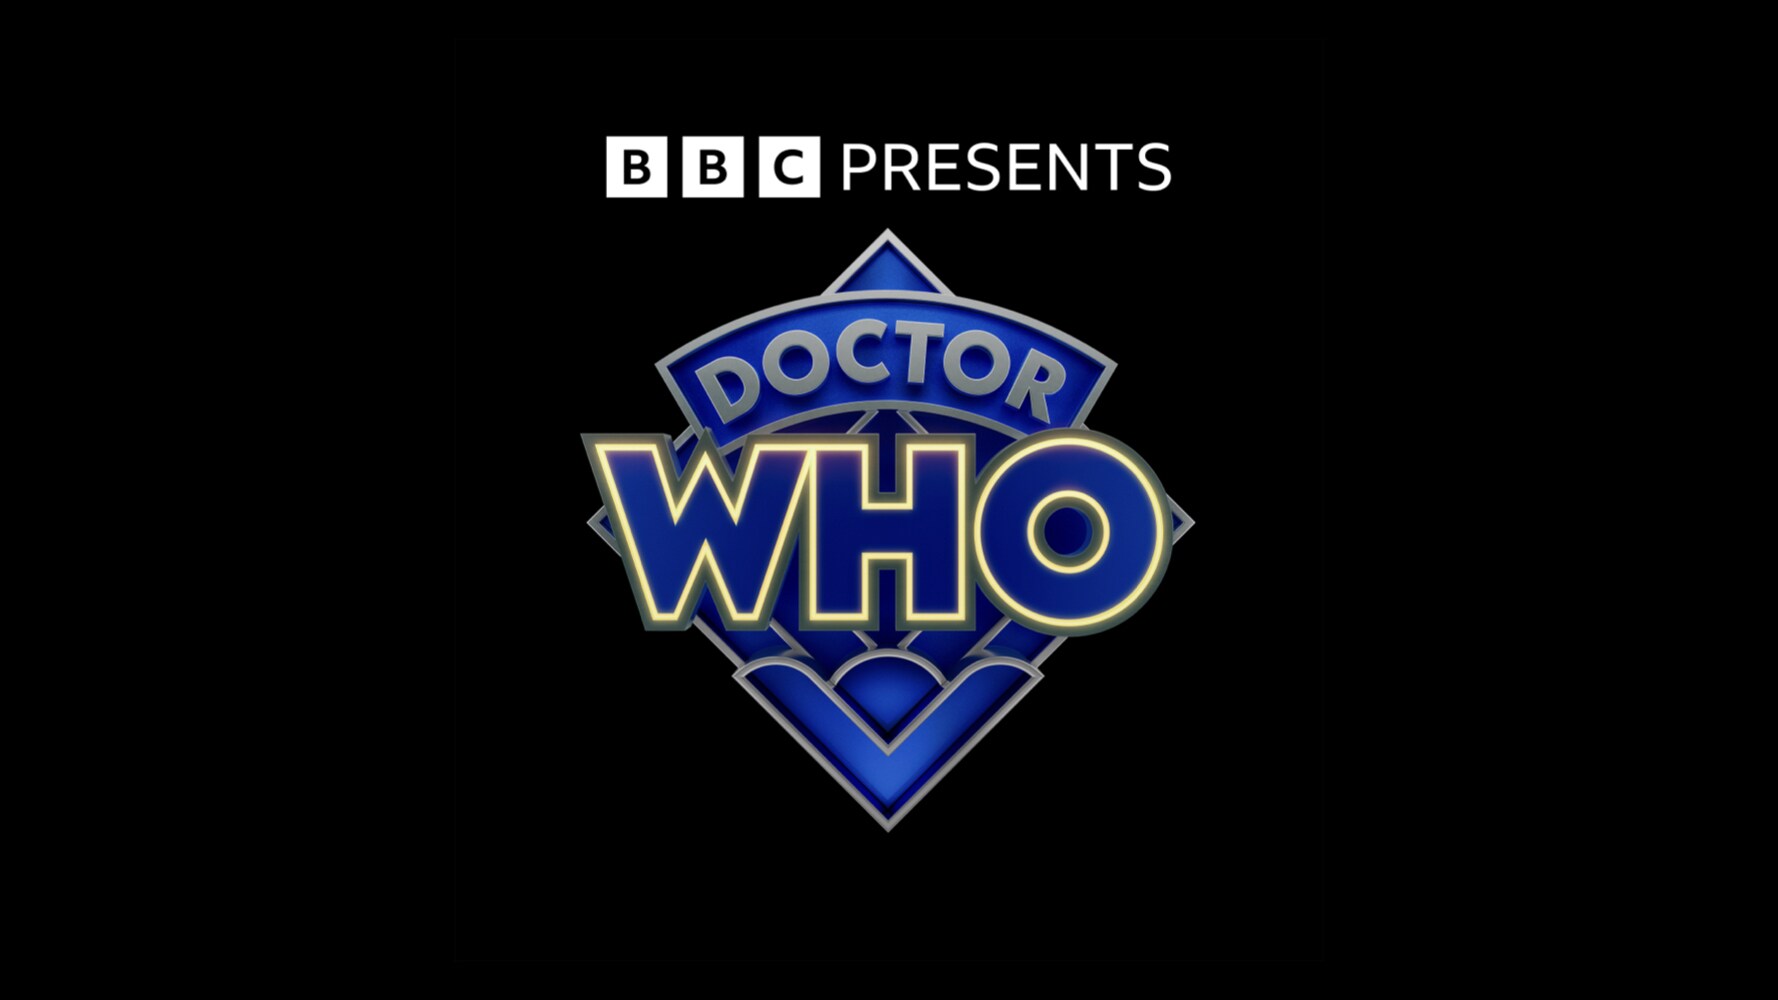 BBC And Disney Branded Television Join Forces On Doctor Who   Disney+ To Become New Global Home For Upcoming Seasons Of Doctor Who Outside The UK & Ireland   BBC Continues As Doctor Who's Exclusive Home In The UK